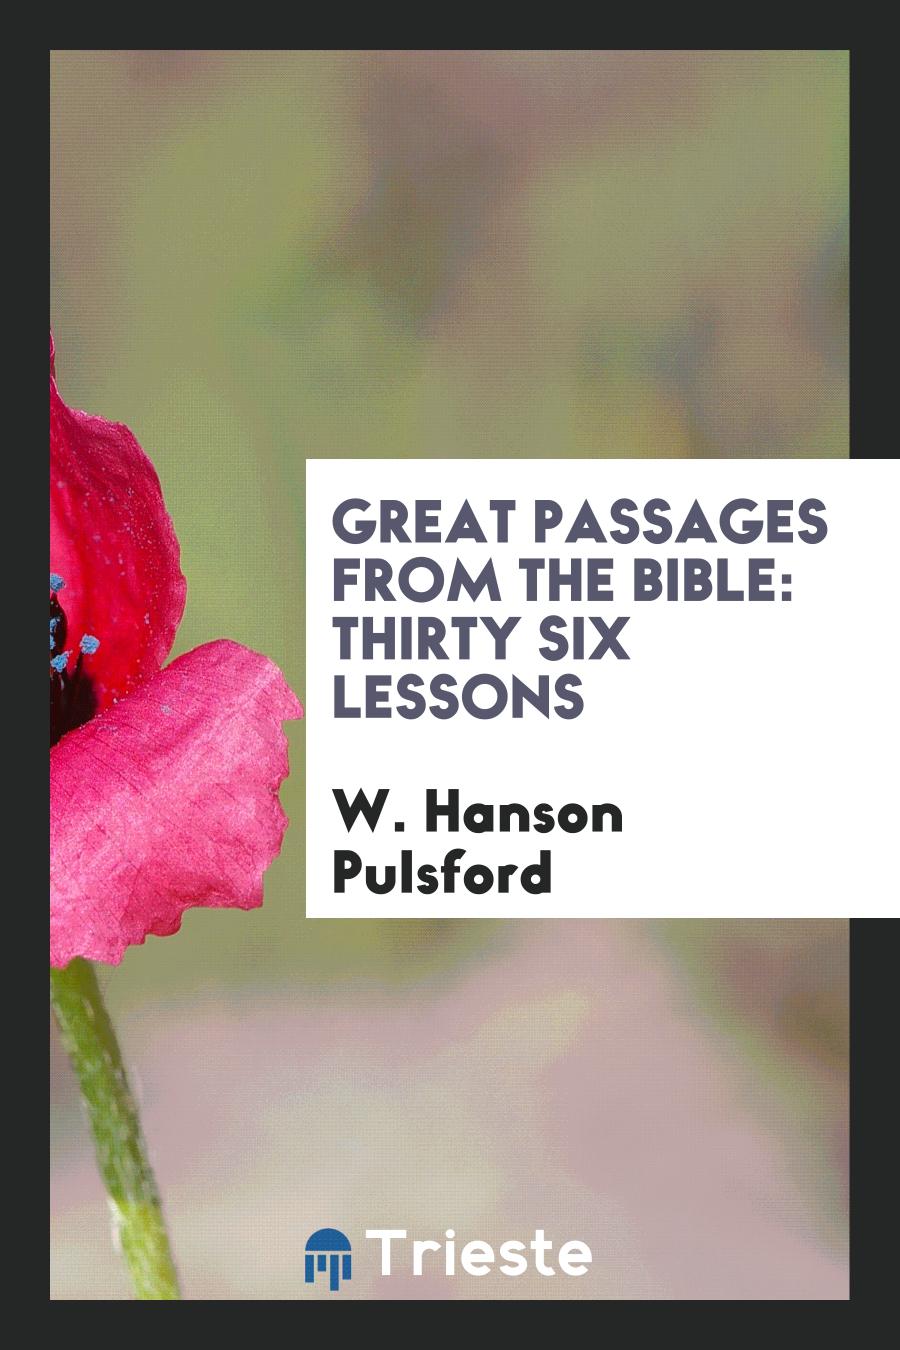 Great Passages from the Bible: Thirty Six Lessons